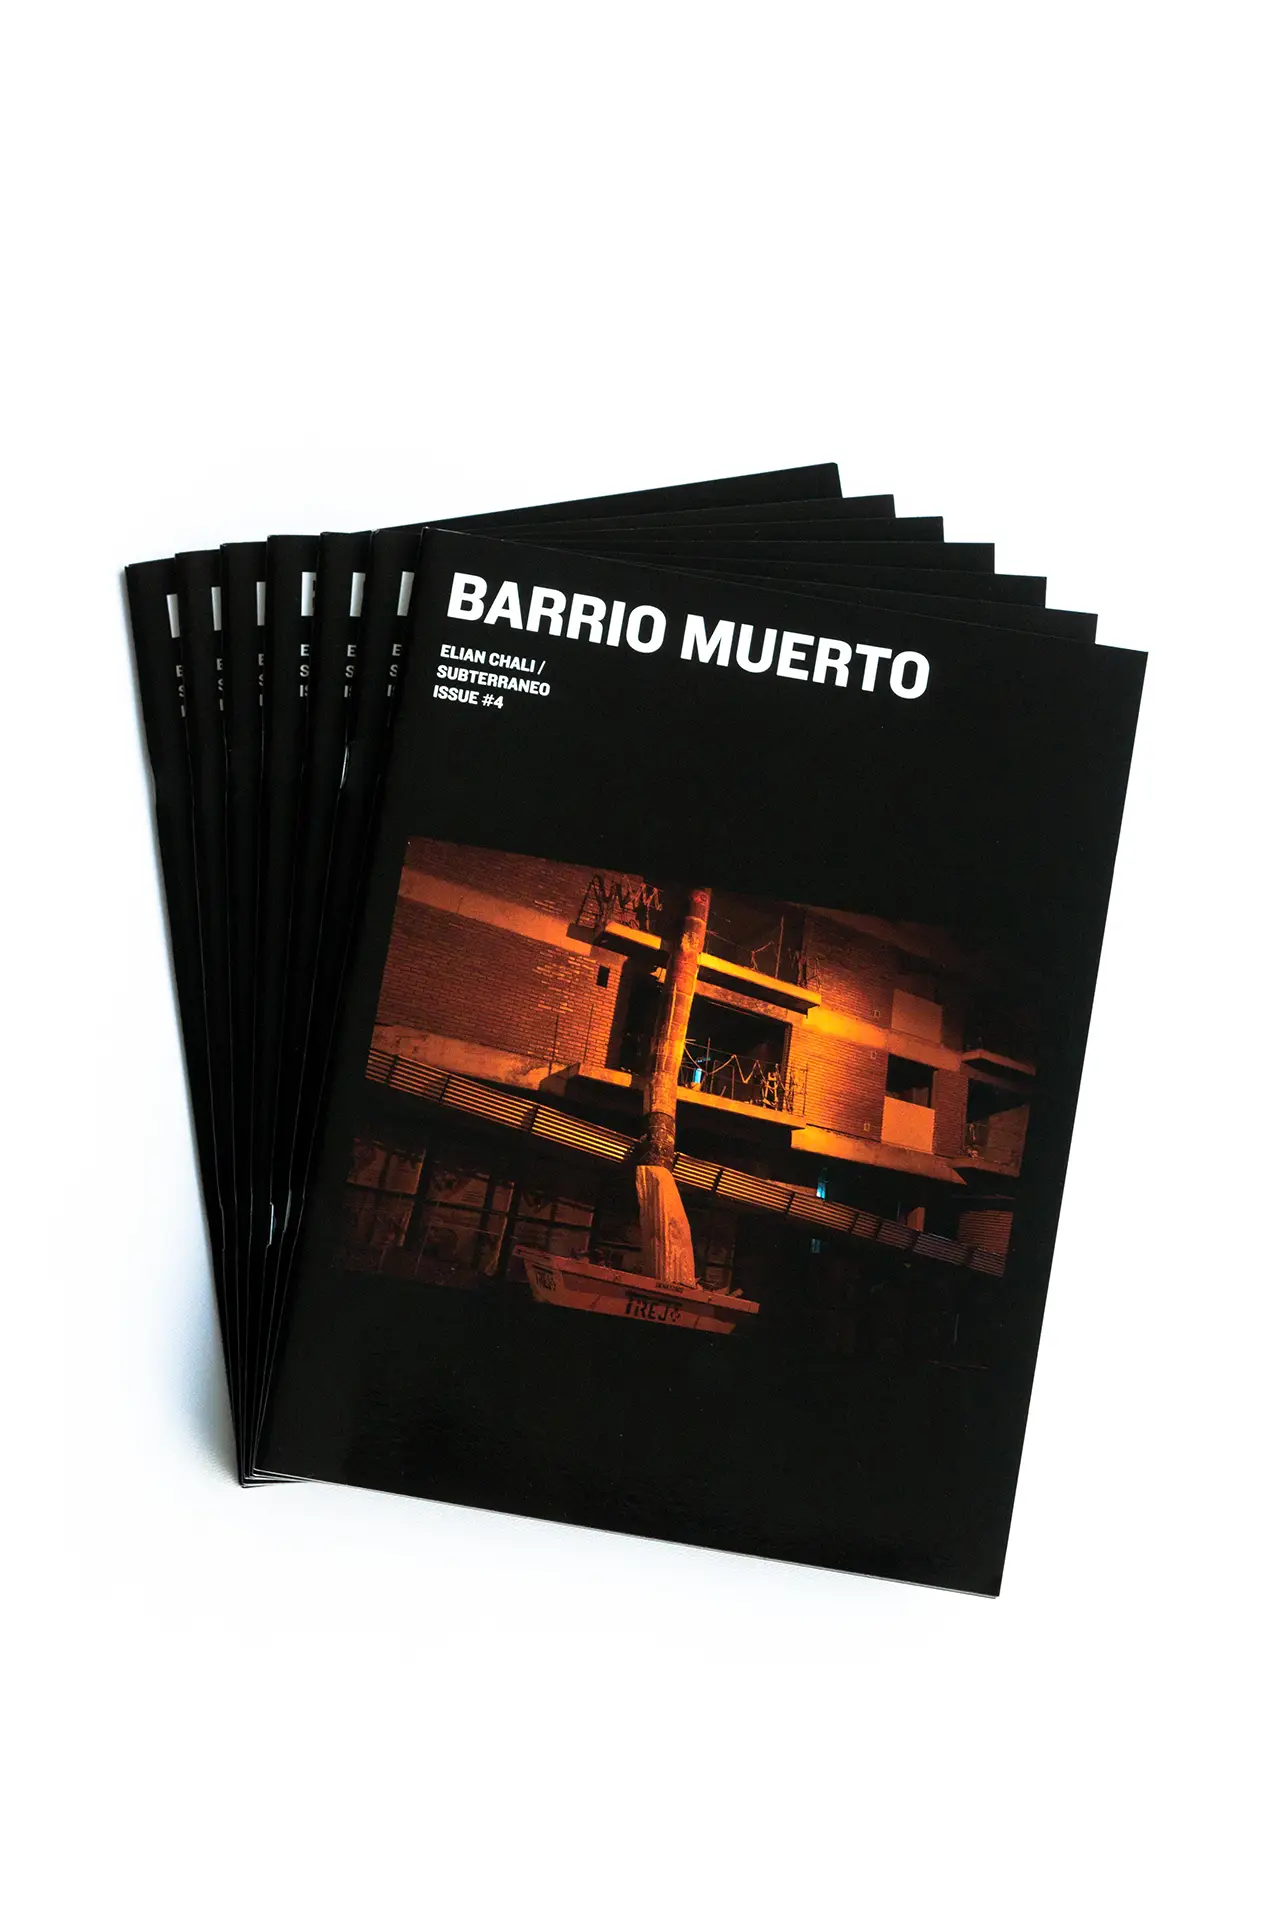 issue #4 | ELIAN CHALI | BARRIO MUERTO featured image